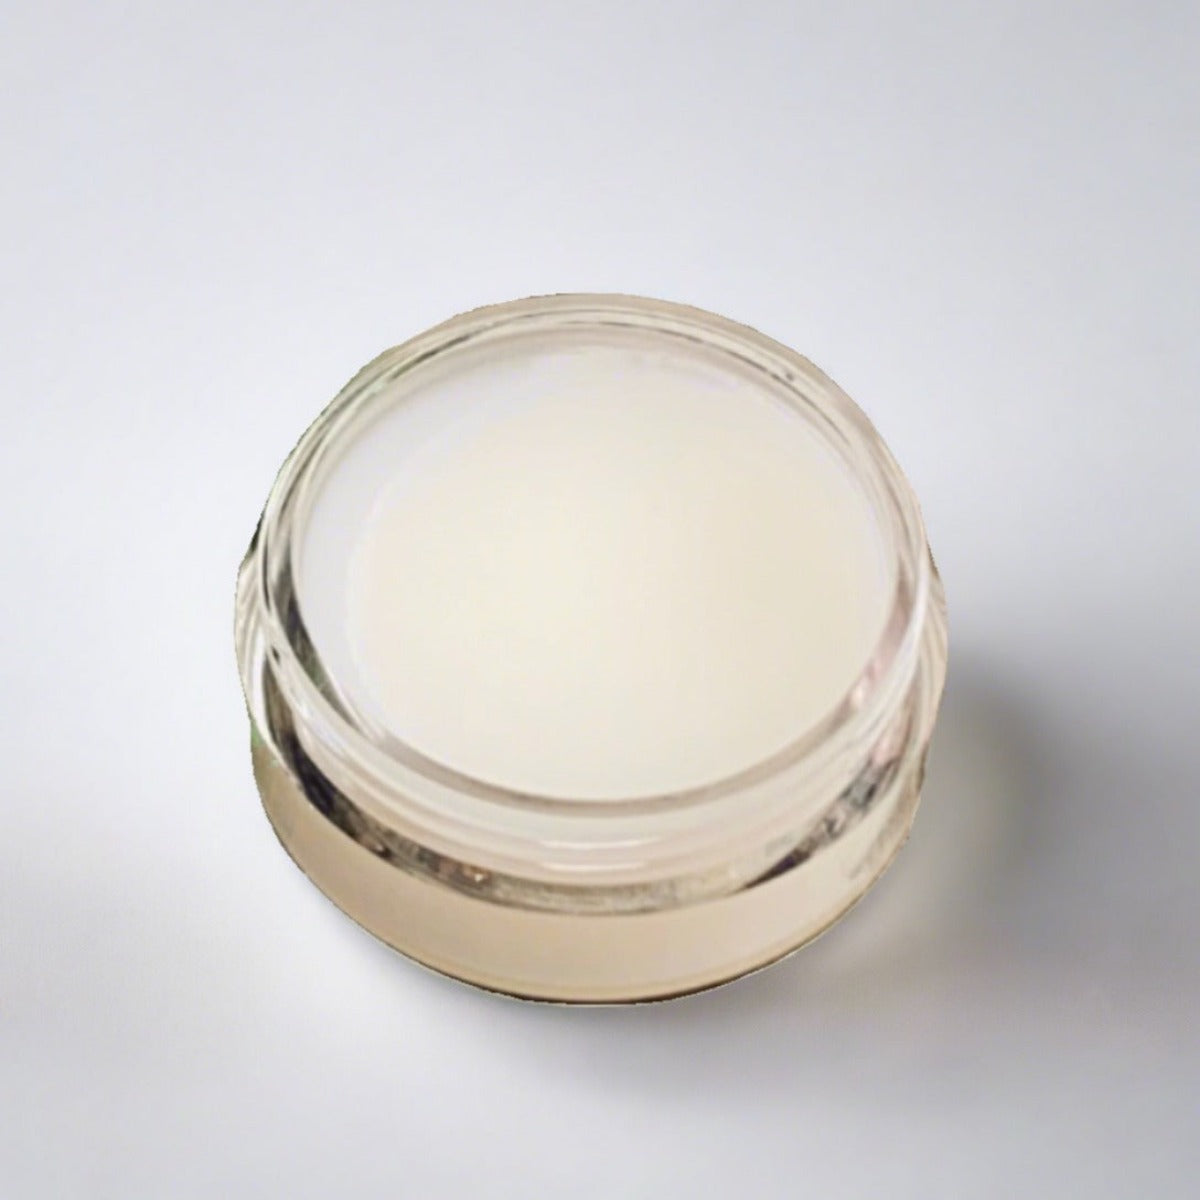 Cosmetic jar of argan eye balm showcasing its pale yellow color and creamy texture